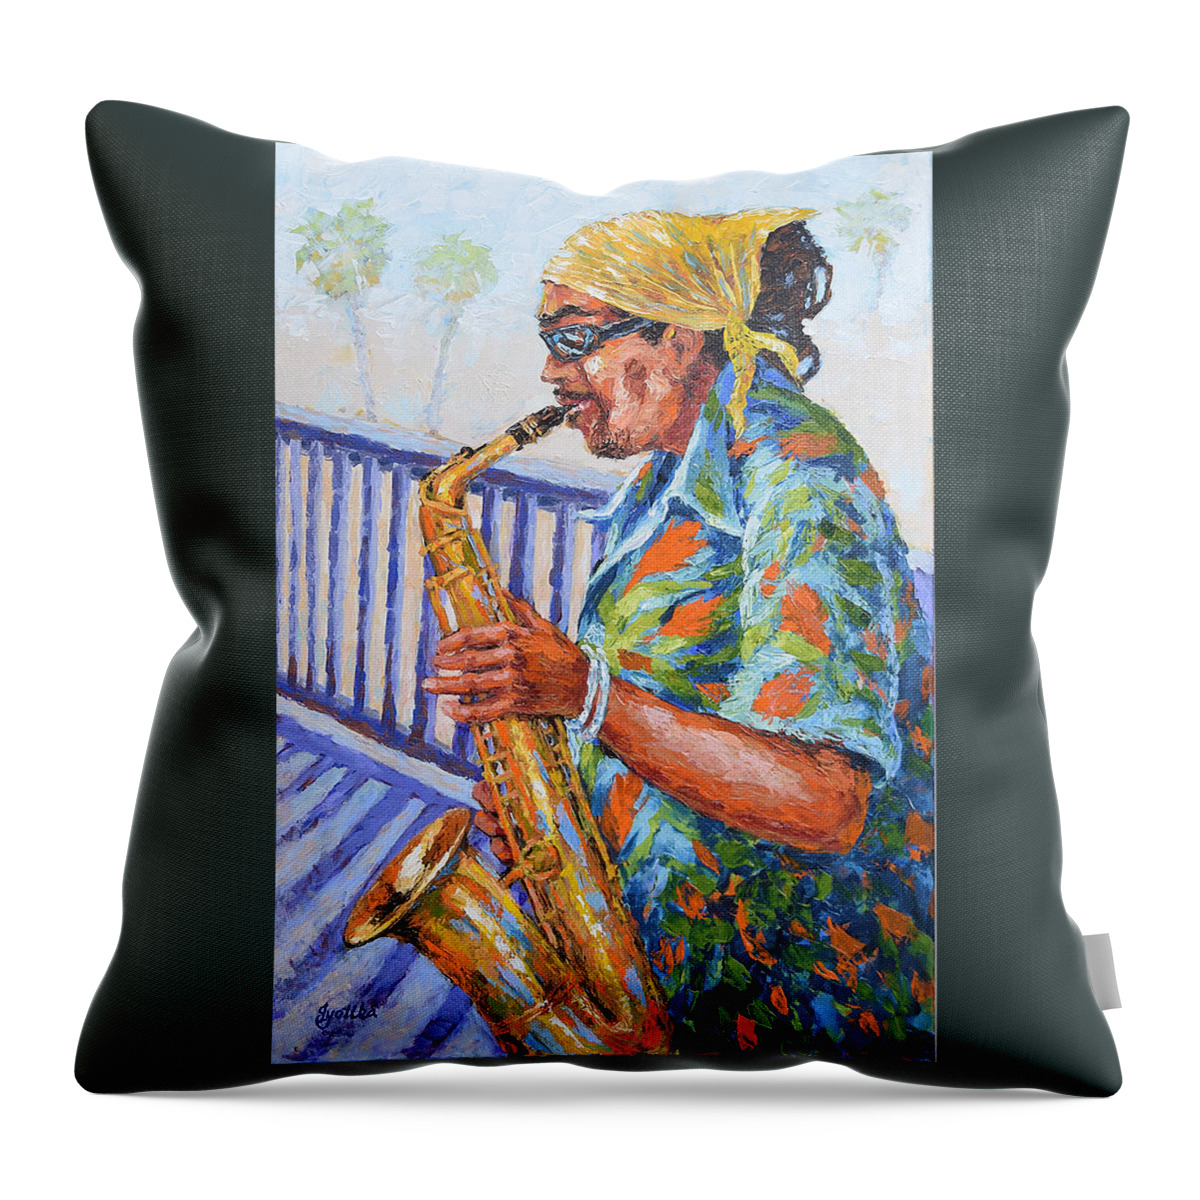 Music Throw Pillow featuring the painting Saxophone Player by Jyotika Shroff